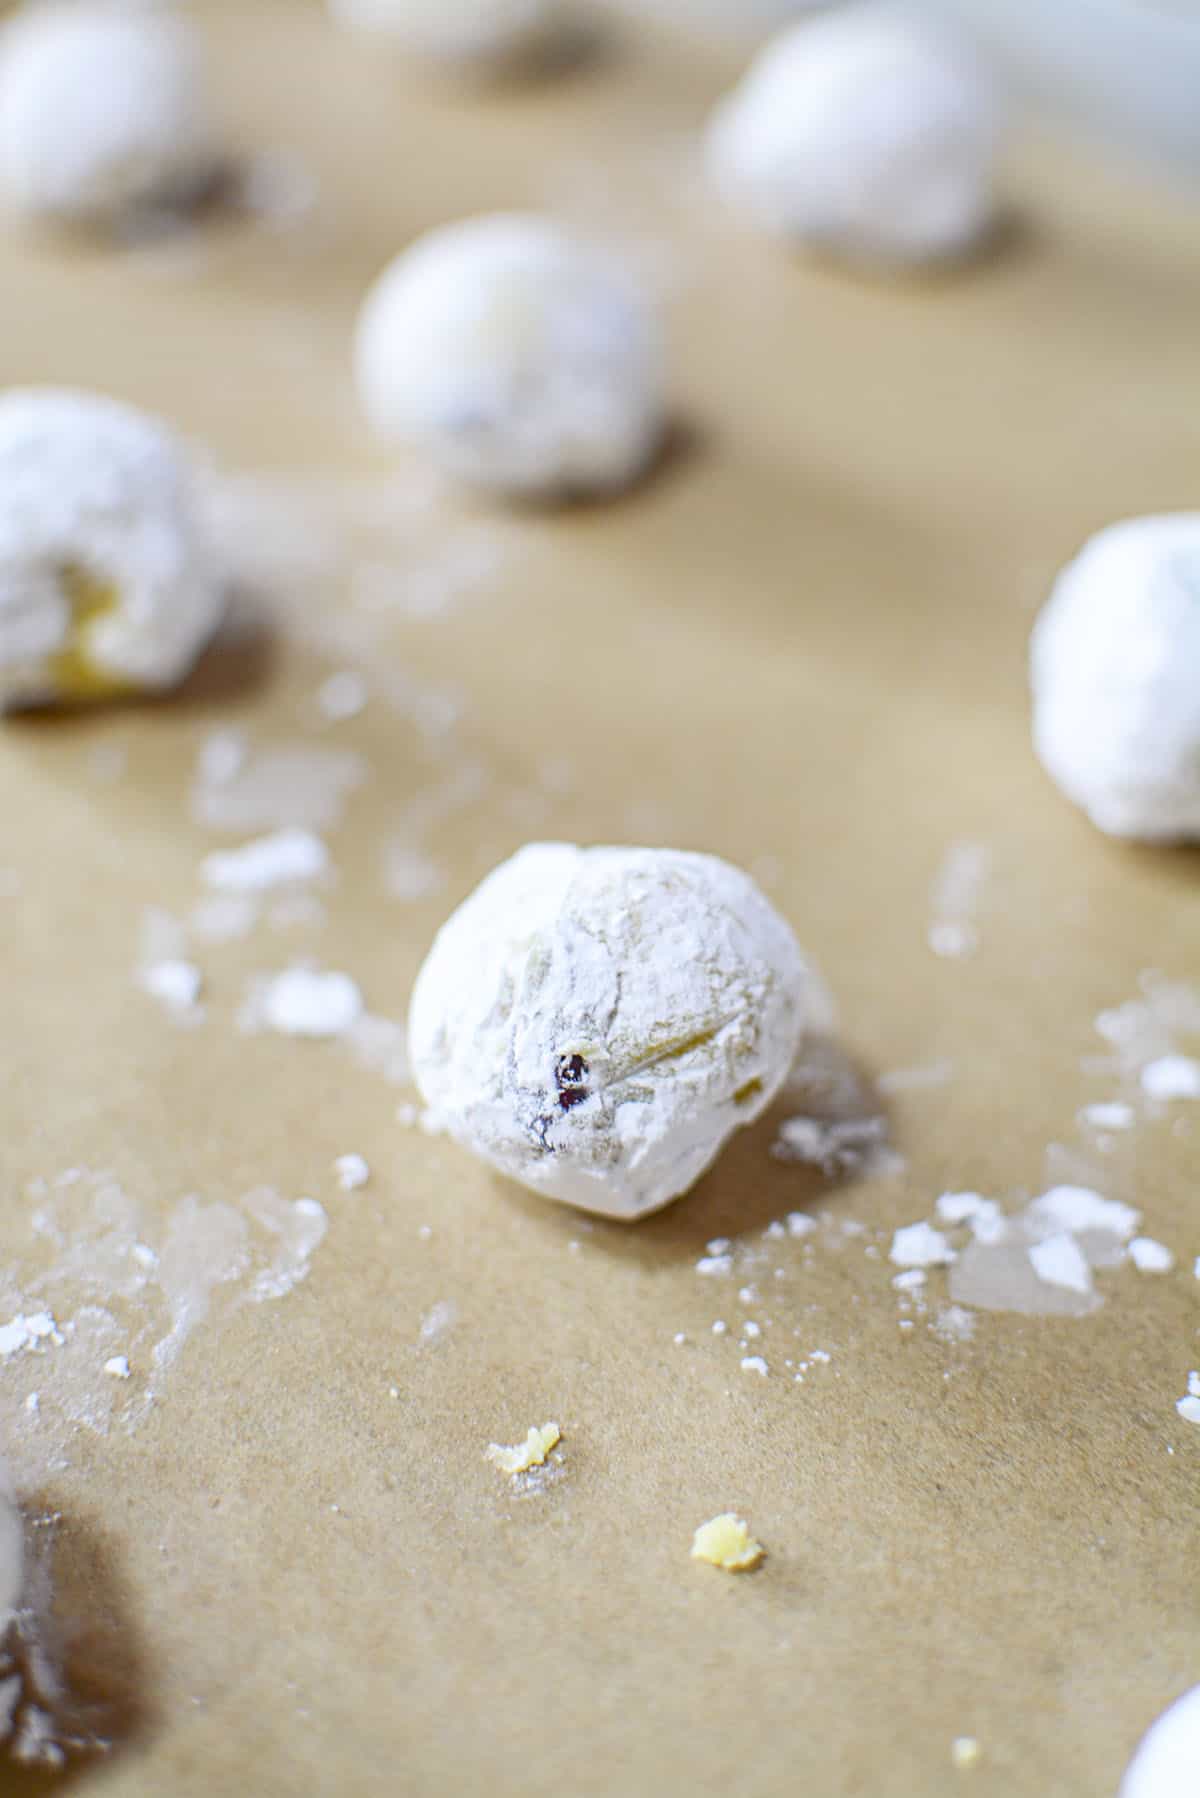 A cookie dough ball rolled in sugar.